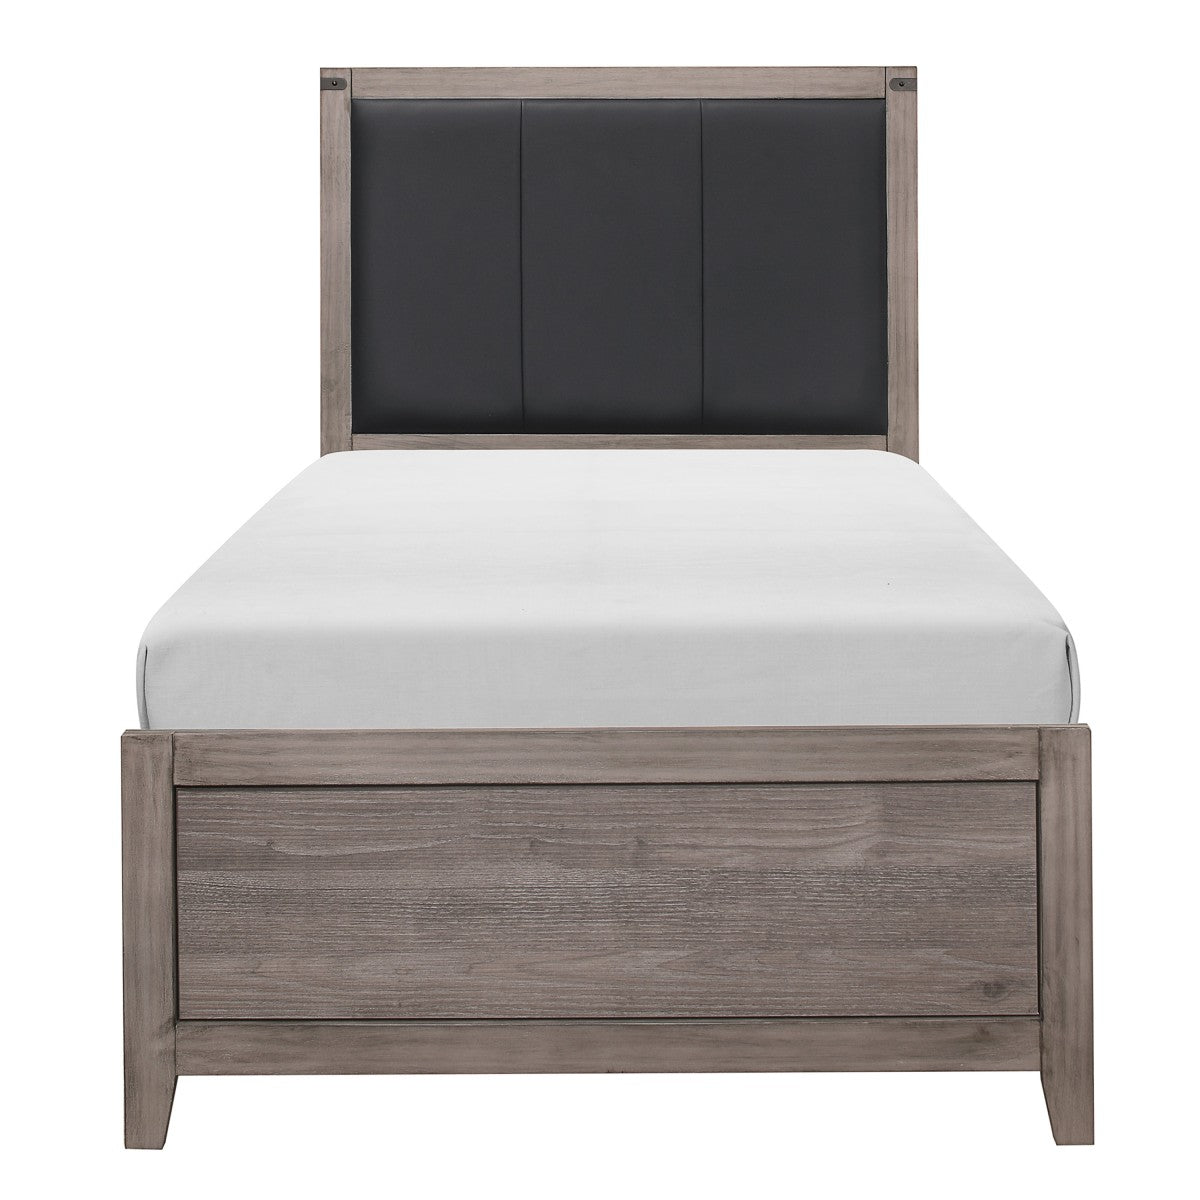 Woodrow Brownish Gray Finish Wood And Engineered Wood Faux Leather Upholstered Headboard Twin Bed